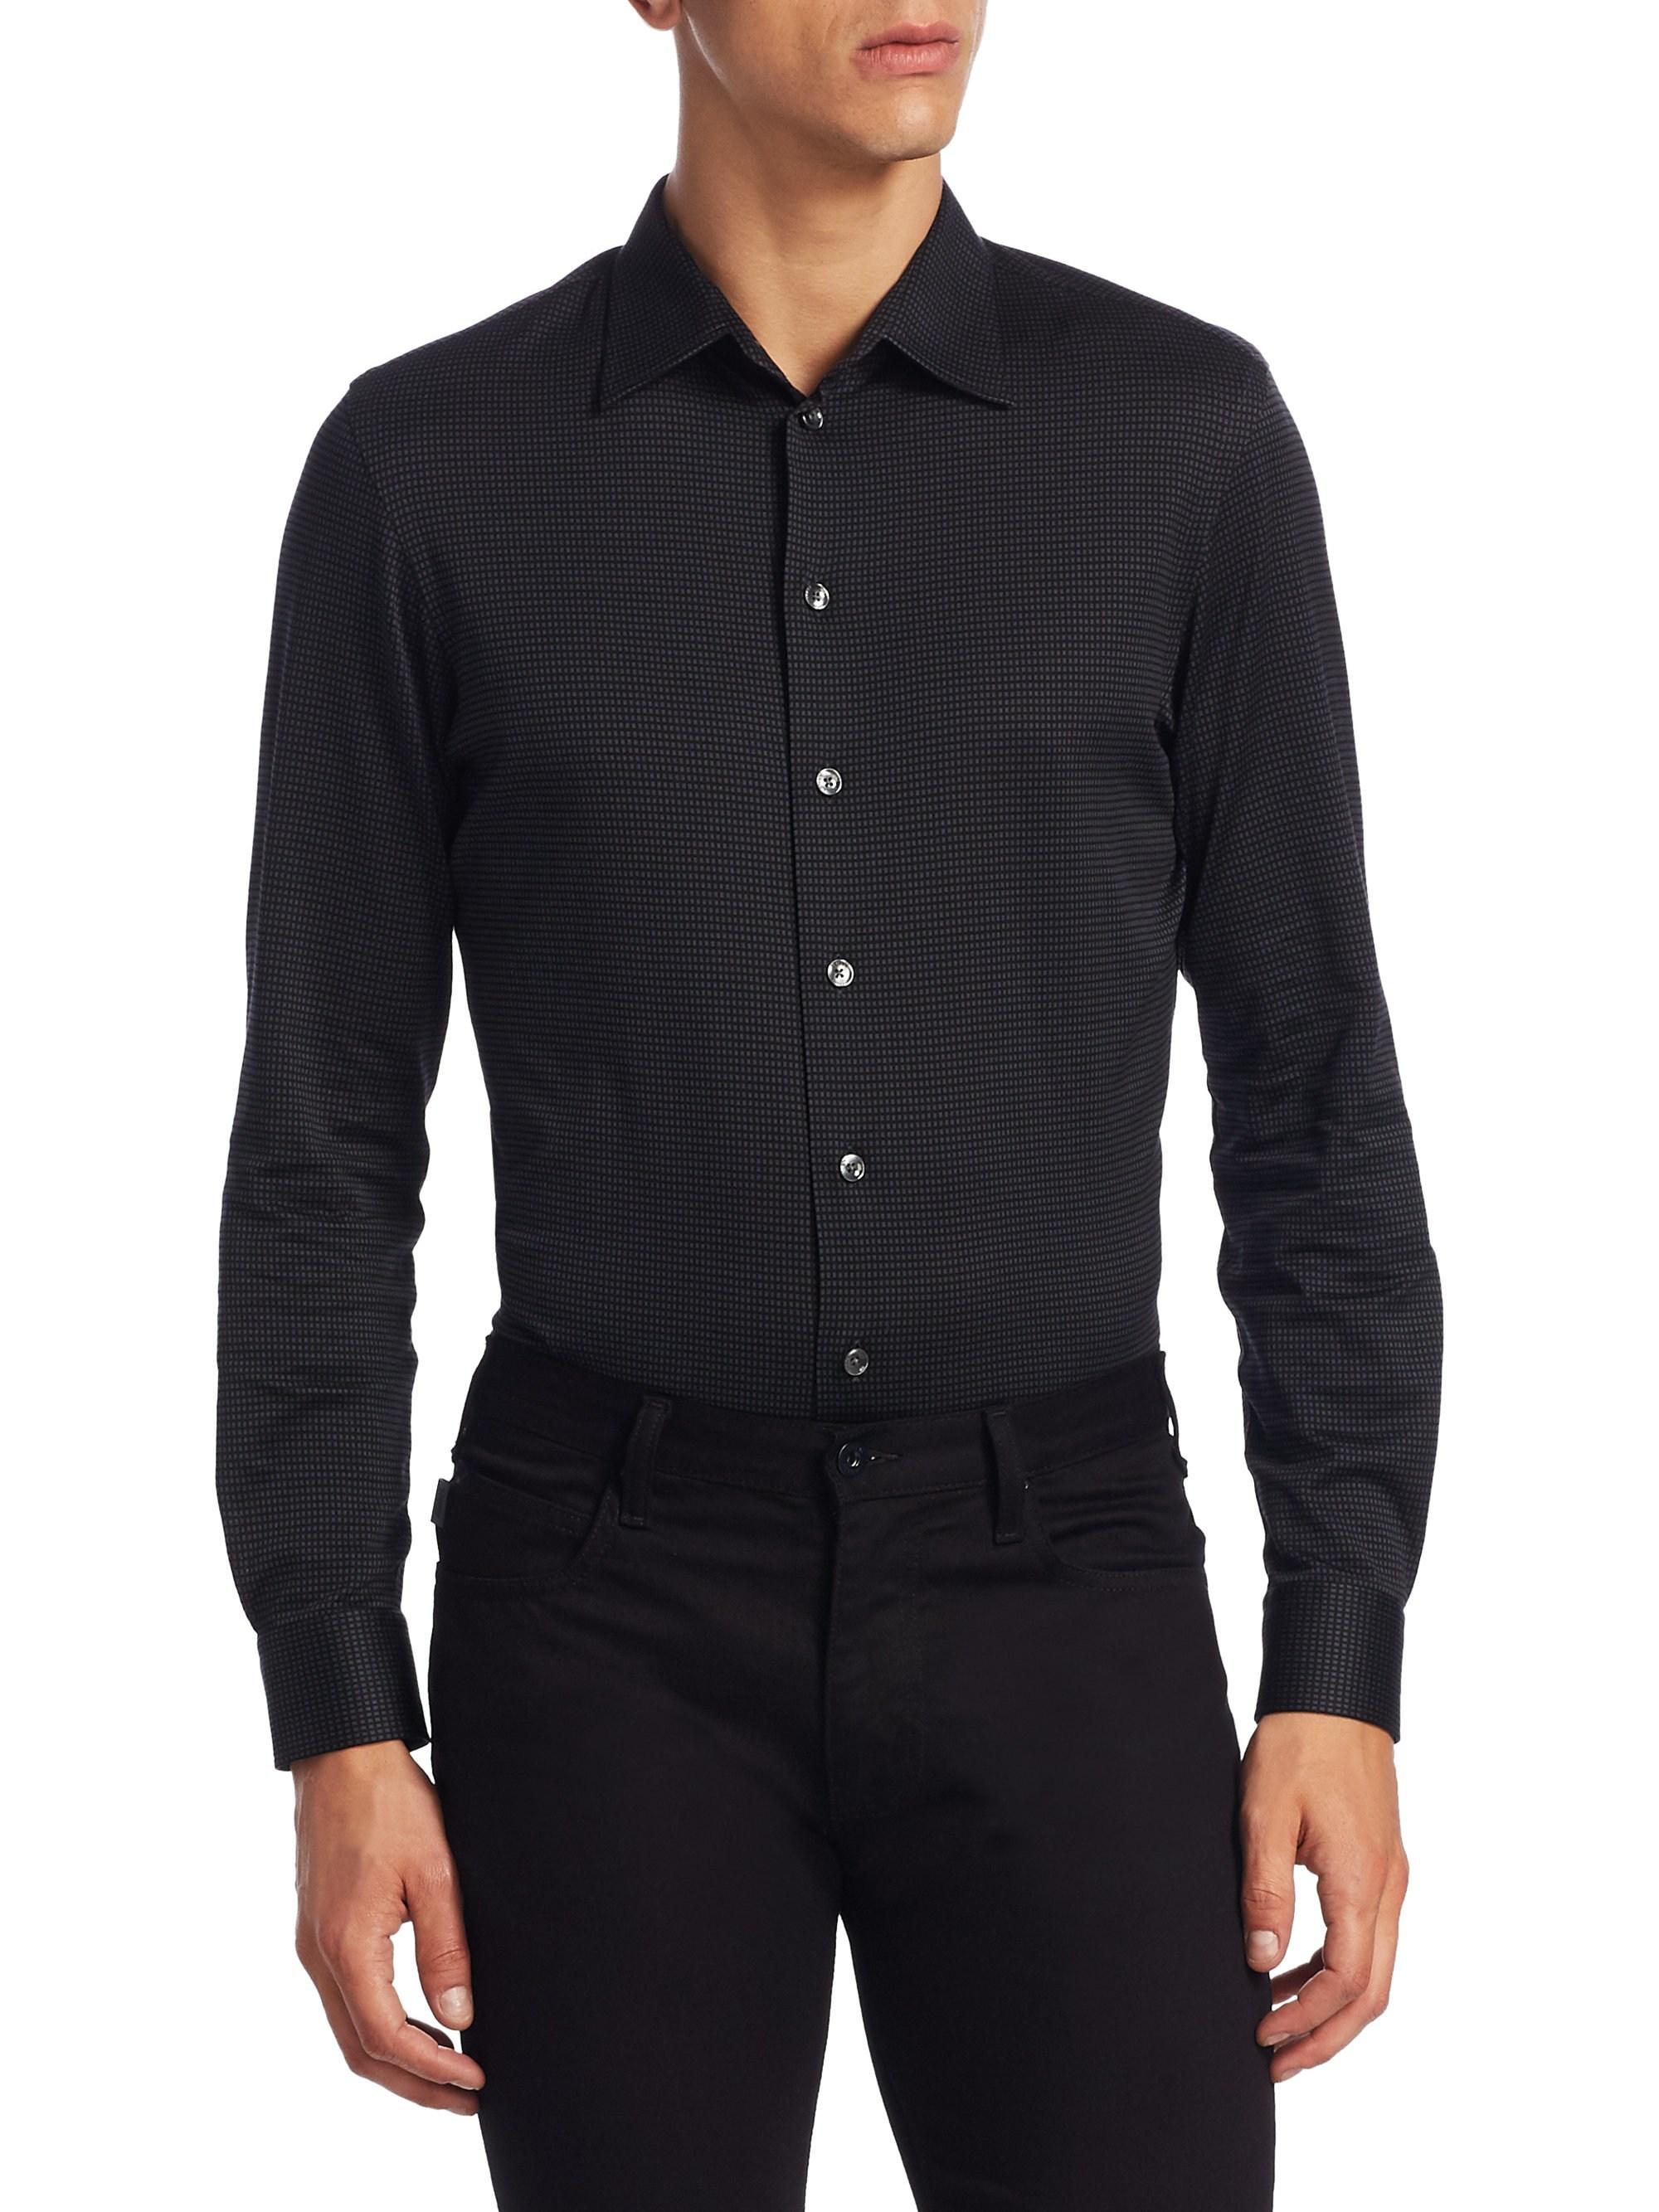 Armani Jersey Cotton Button-down Shirt in Black for Men - Lyst